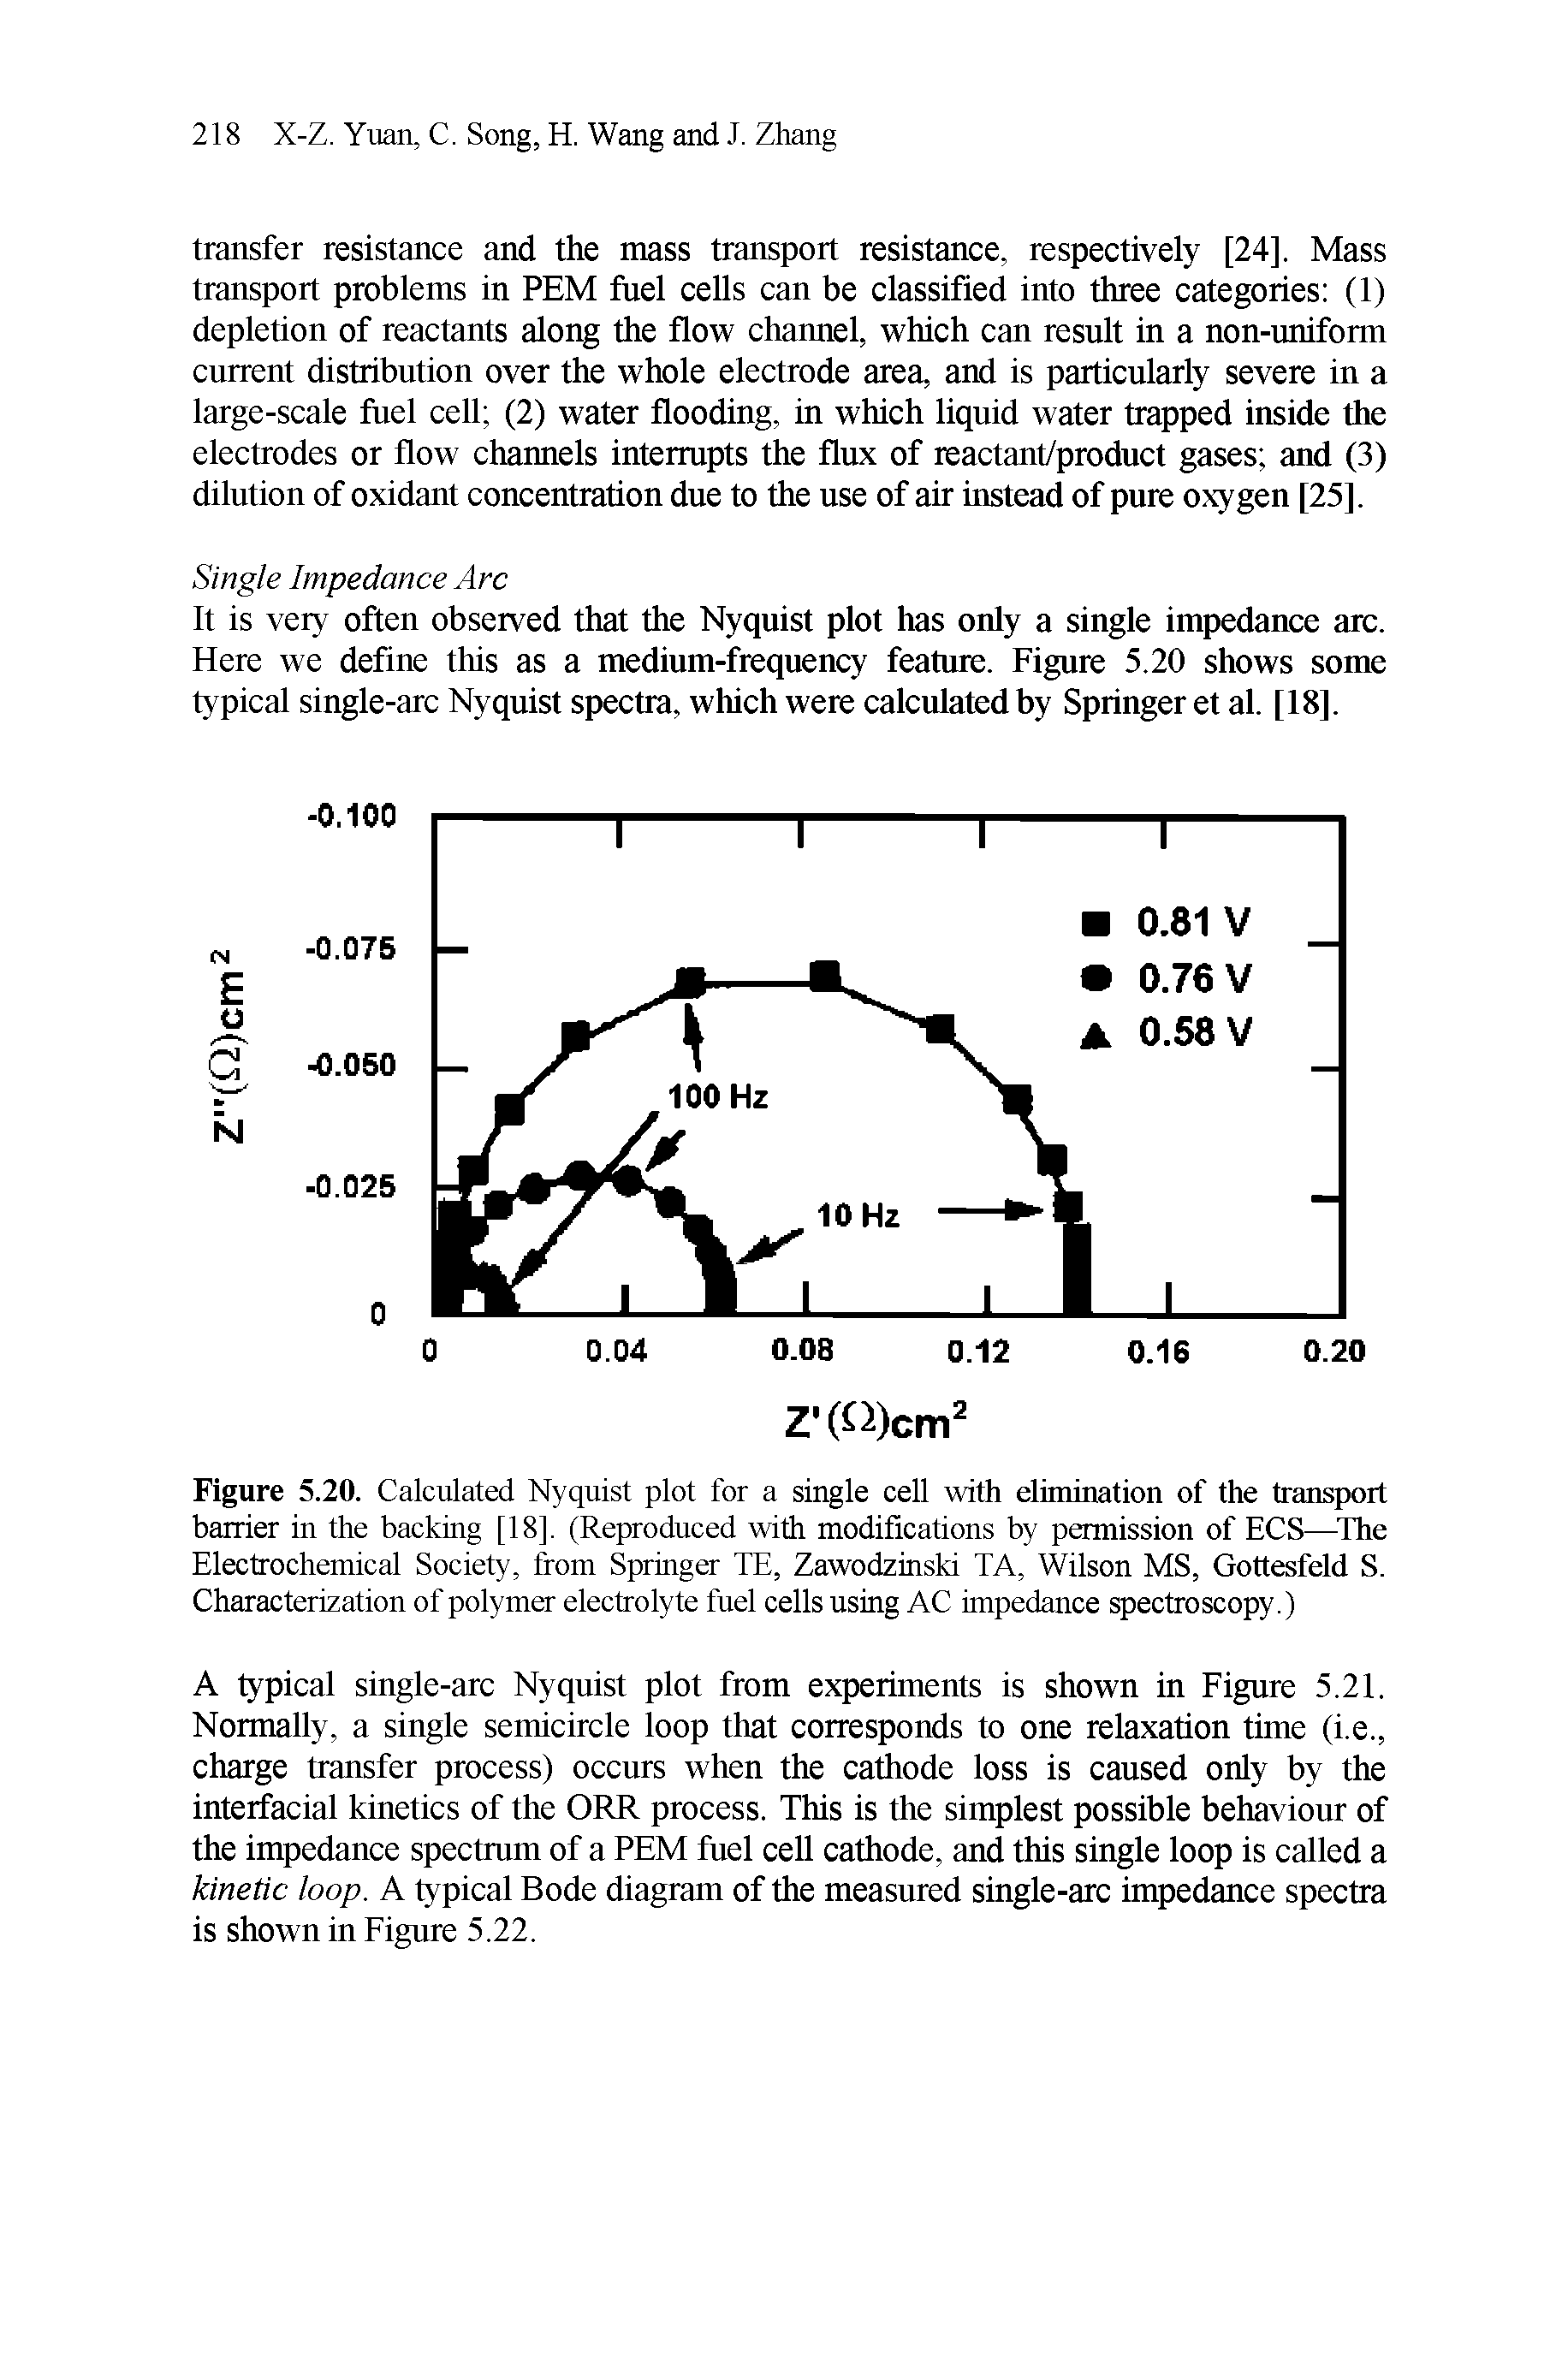 Figure 5.20. Calculated Nyquist plot for a single cell with elimination of the transport barrier in the backing [18], (Reproduced with modifications by permission of ECS—The Electrochemical Society, from Springer TE, Zawodzinski TA, Wilson MS, Gottesfeld S. Characterization of polymer electrolyte fuel cells using AC impedance spectroscopy.)...